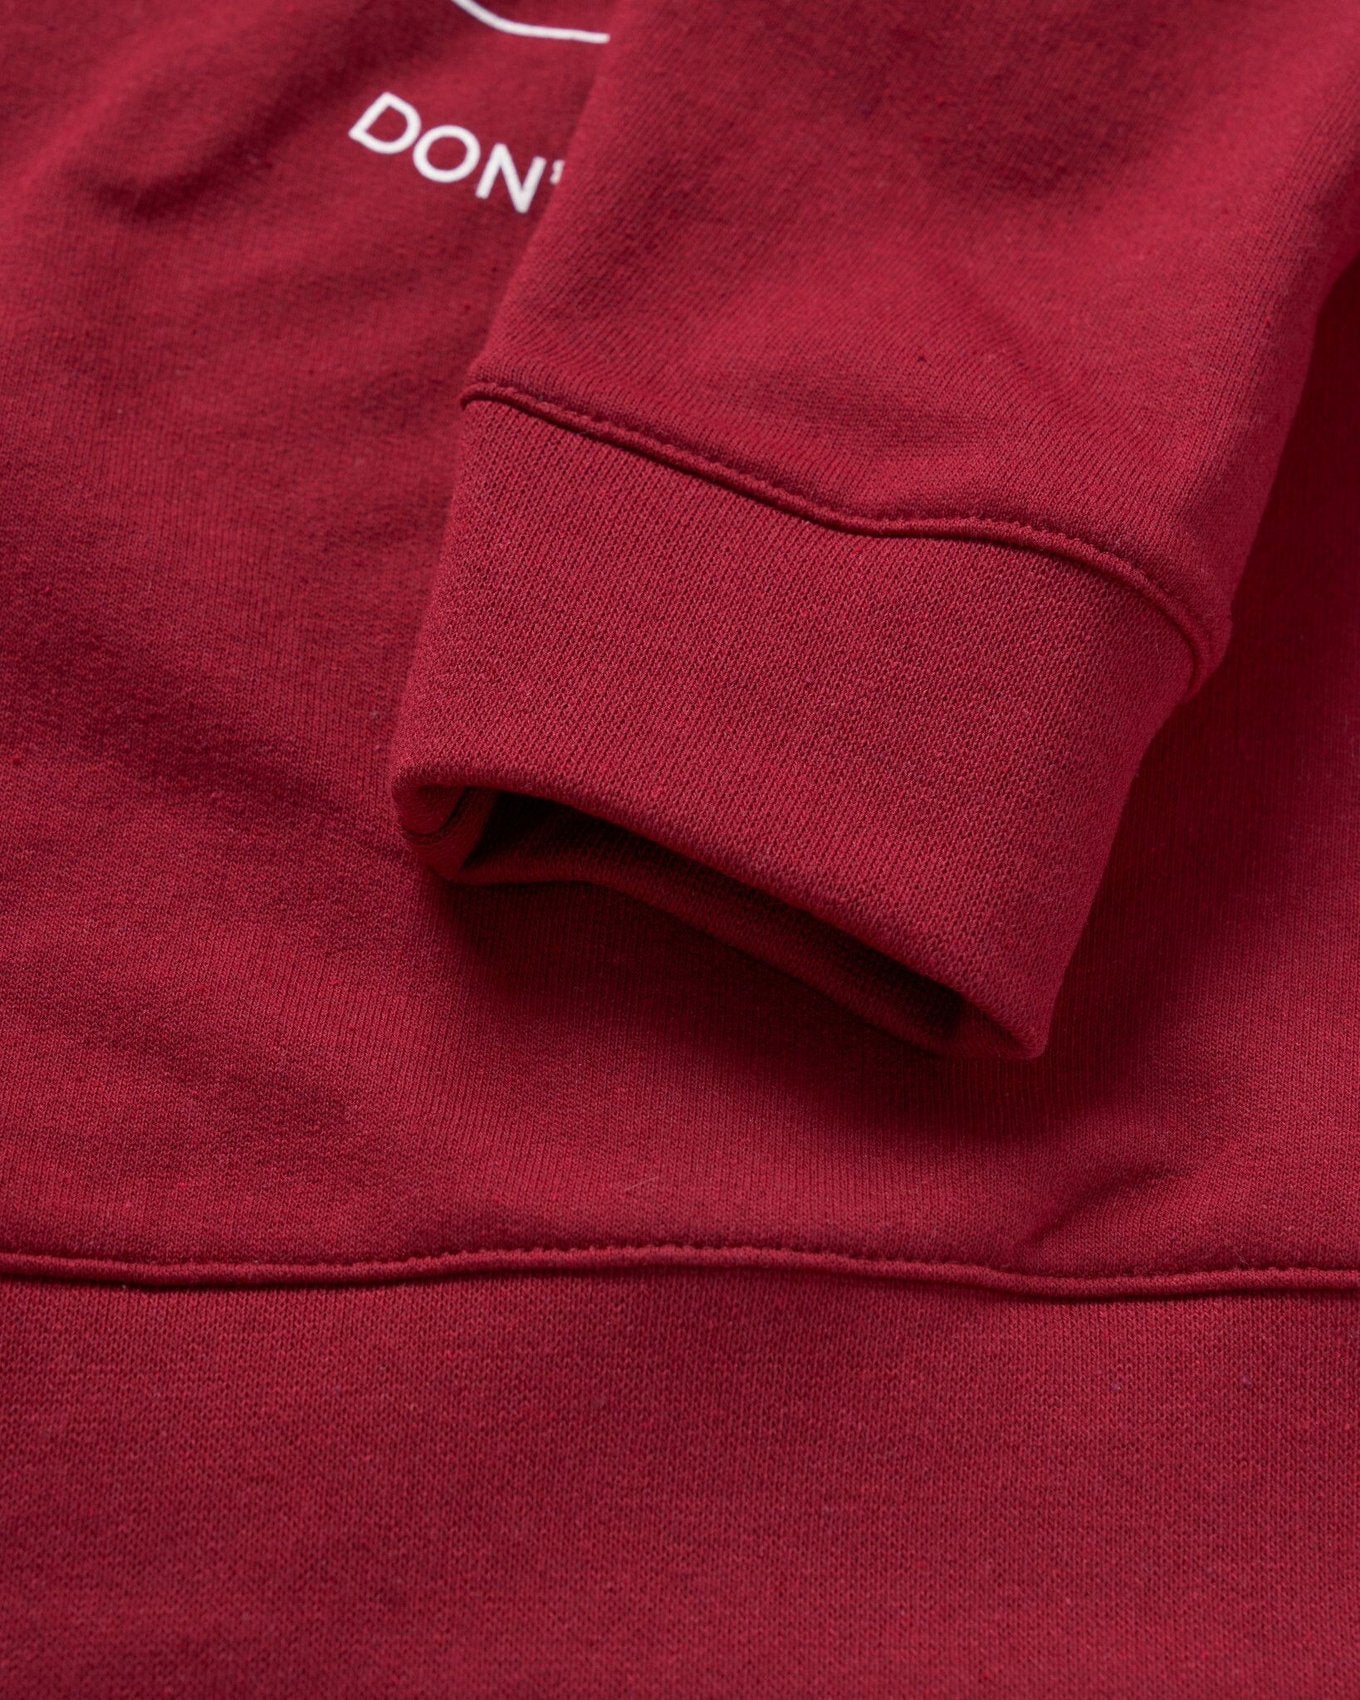 ReApparel Water Crew Neck . in color Garnet and shape long sleeve